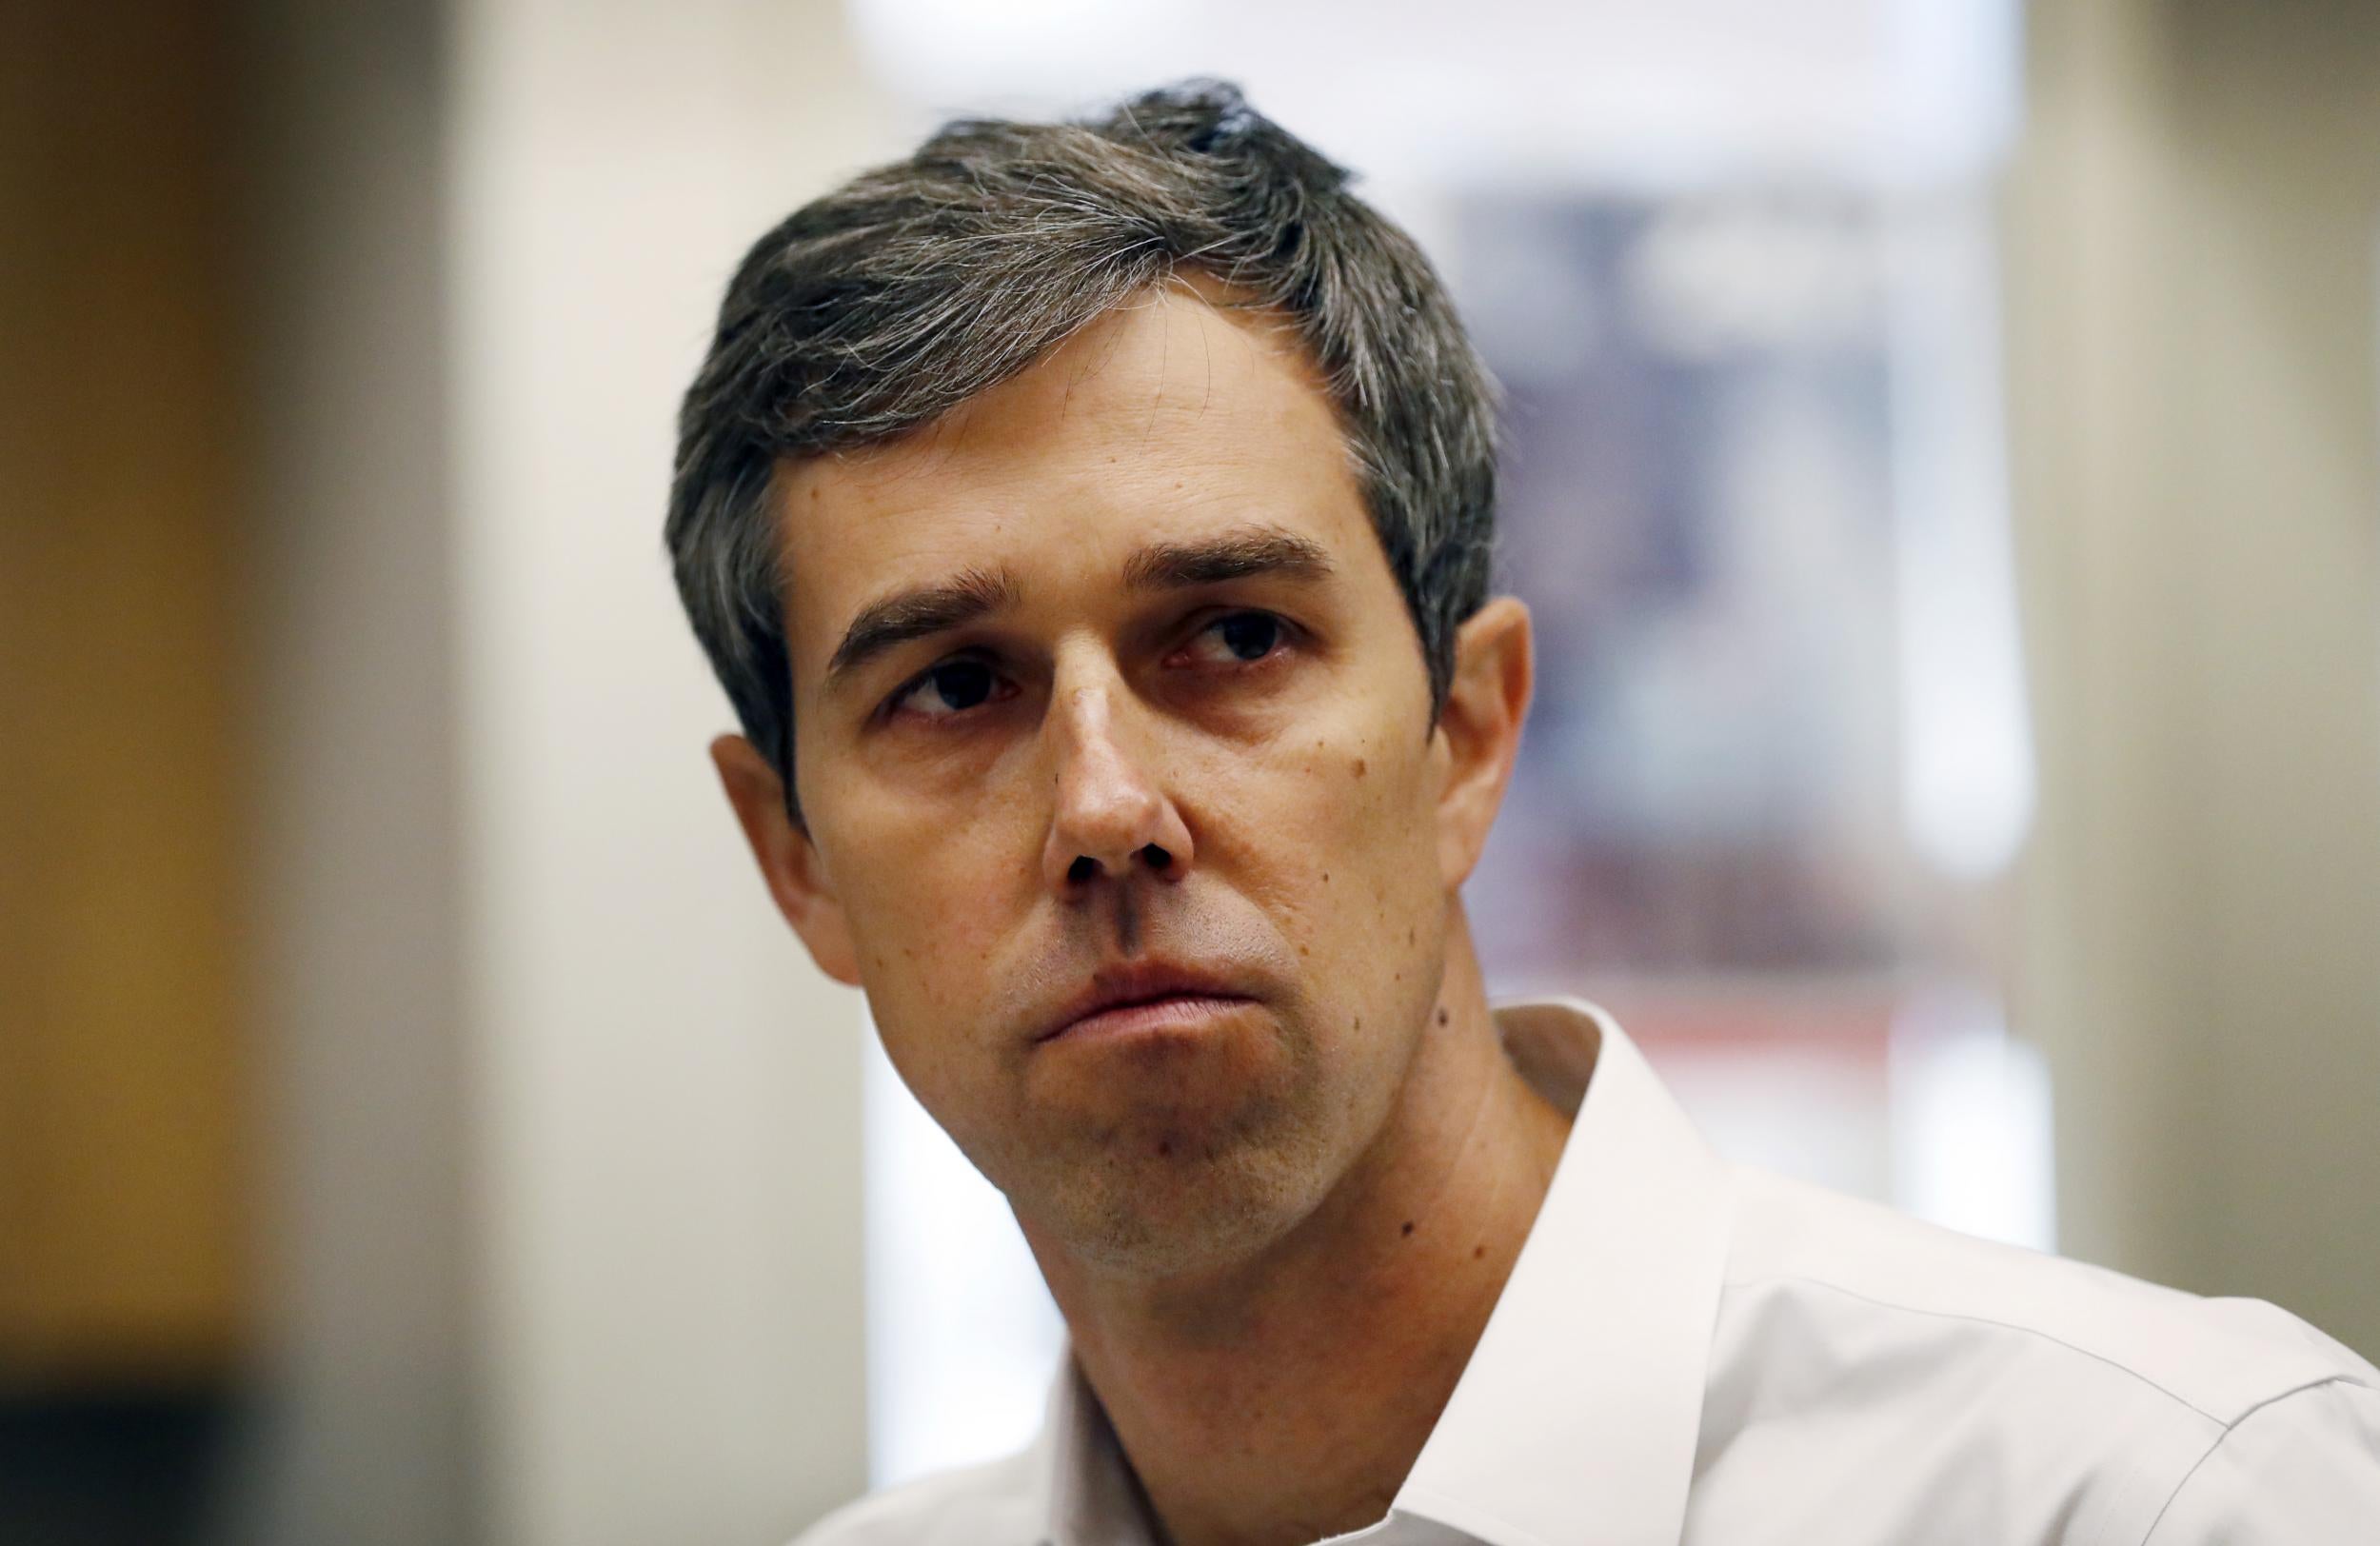 Beto O&apos;Rourke campaign: Bernie Sanders&apos; supporters fuel misinformation about Texas Democrat&apos;s record-breaking fundraising haul